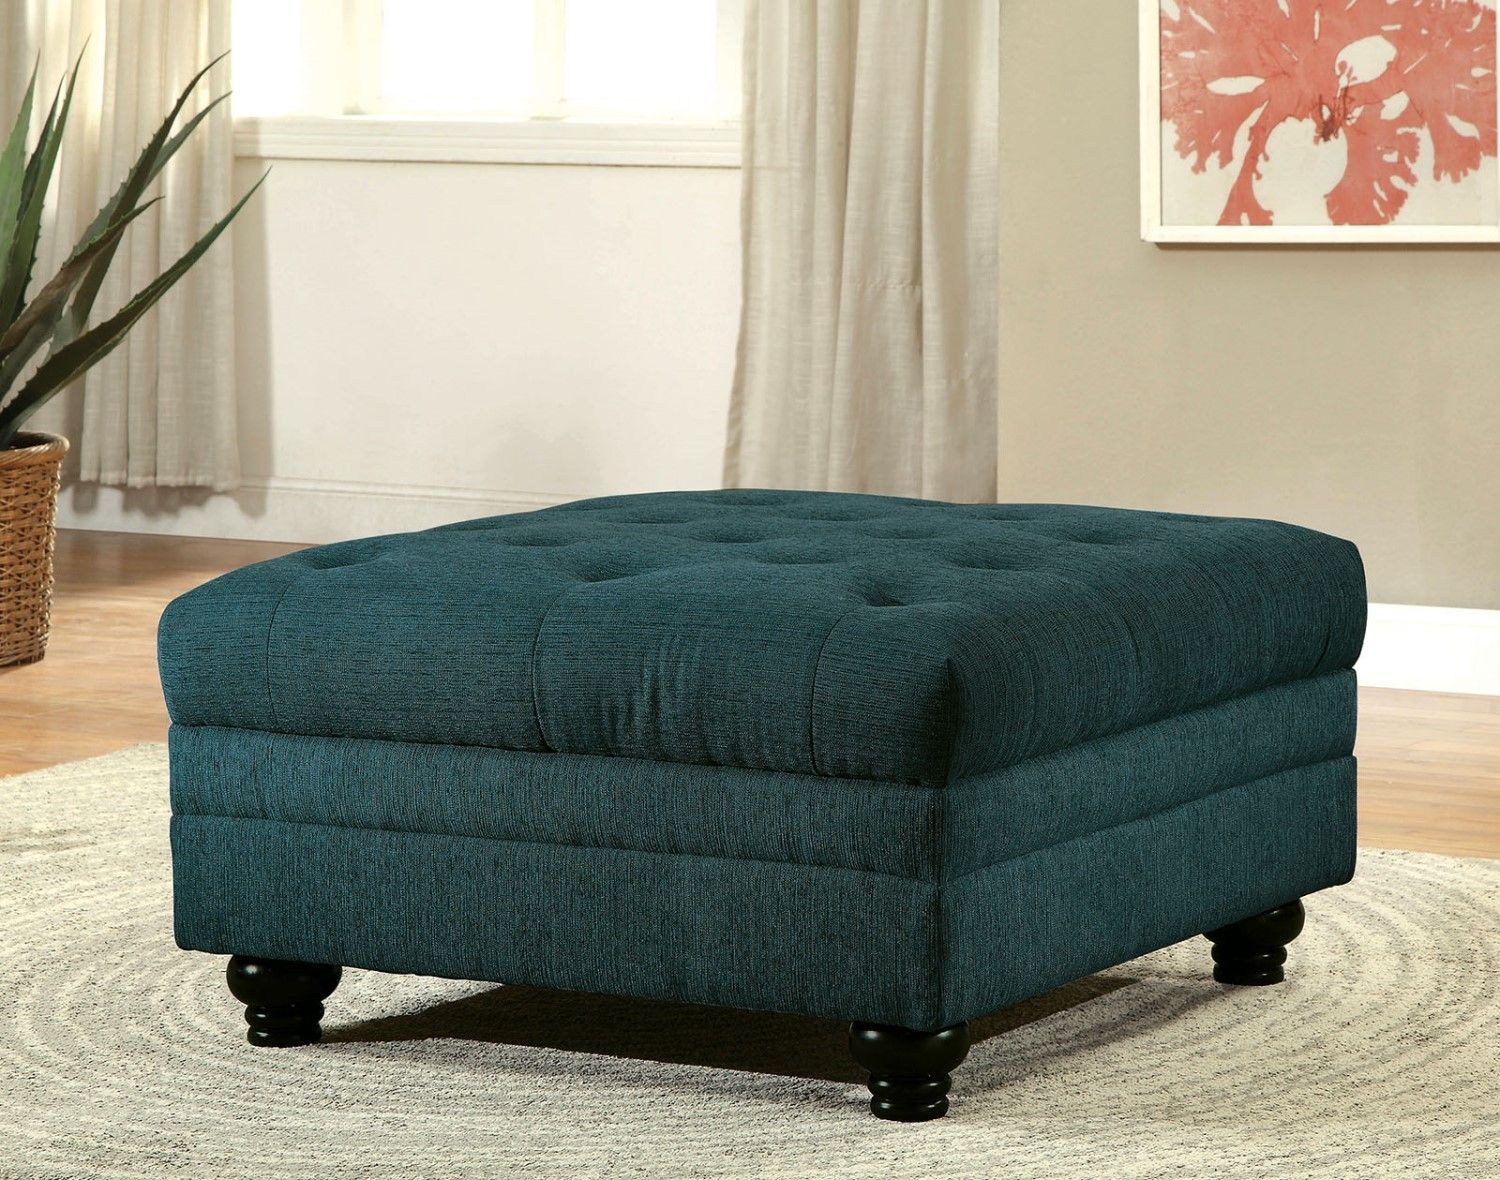 Stanford Ii Traditional Button Tufted Ottoman In Teal Fabric Upholstery Pertaining To Tufted Fabric Ottomans (View 9 of 20)